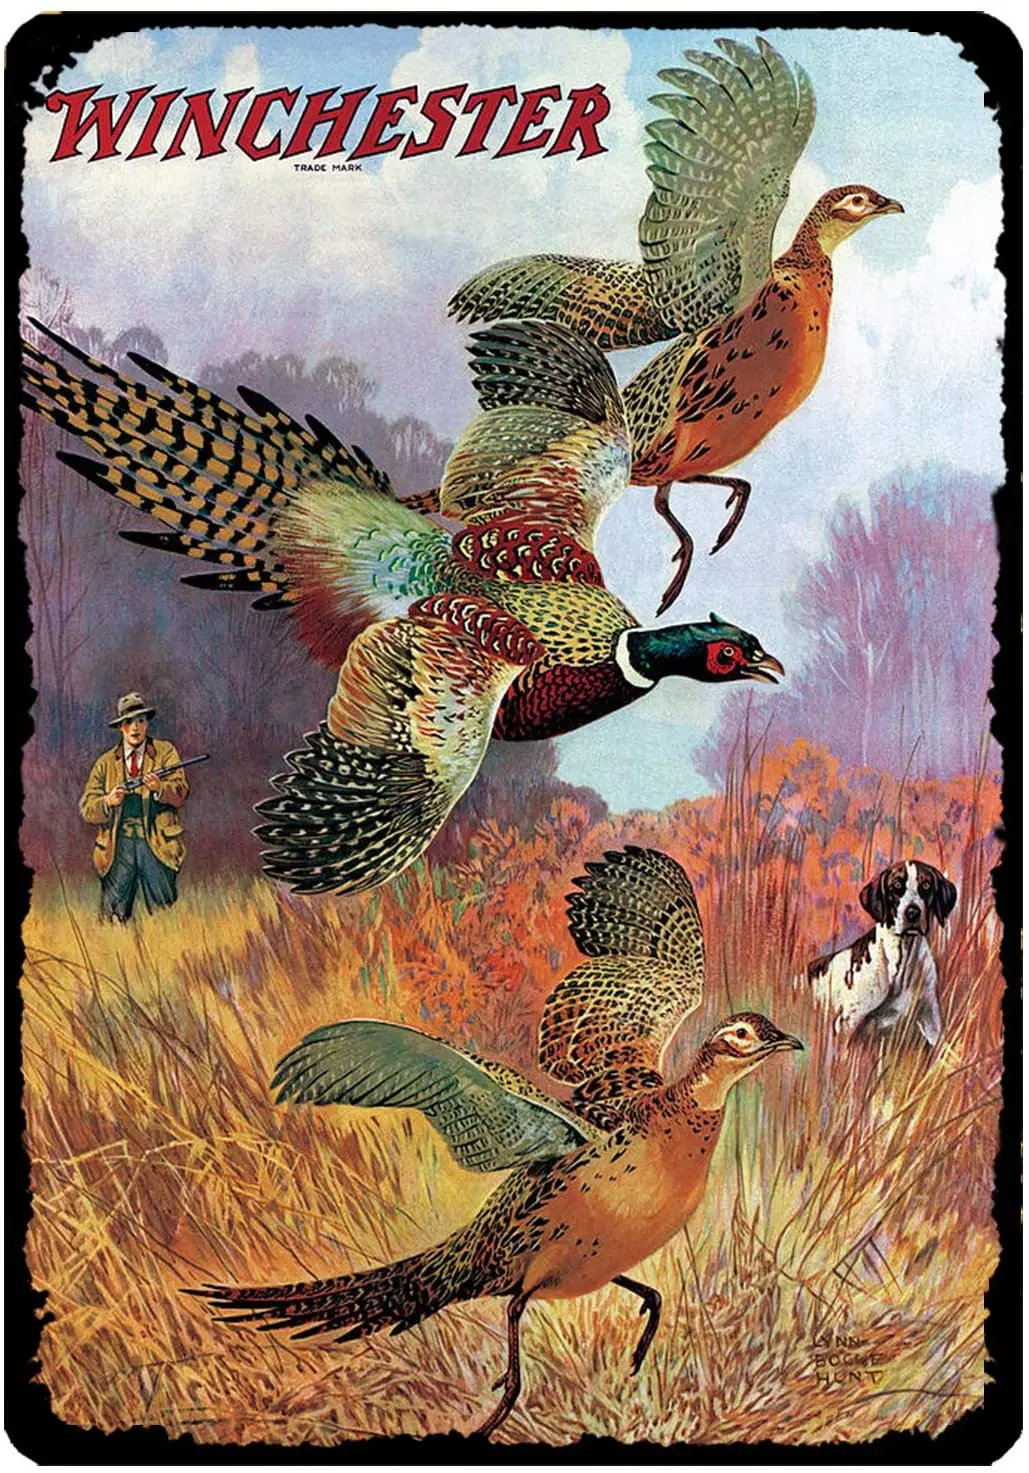 

New Vintage Metal Tin Sign Pheasants on The Rise Winchester Firearm Hunting Hunter Wall Decor Plaque Signs